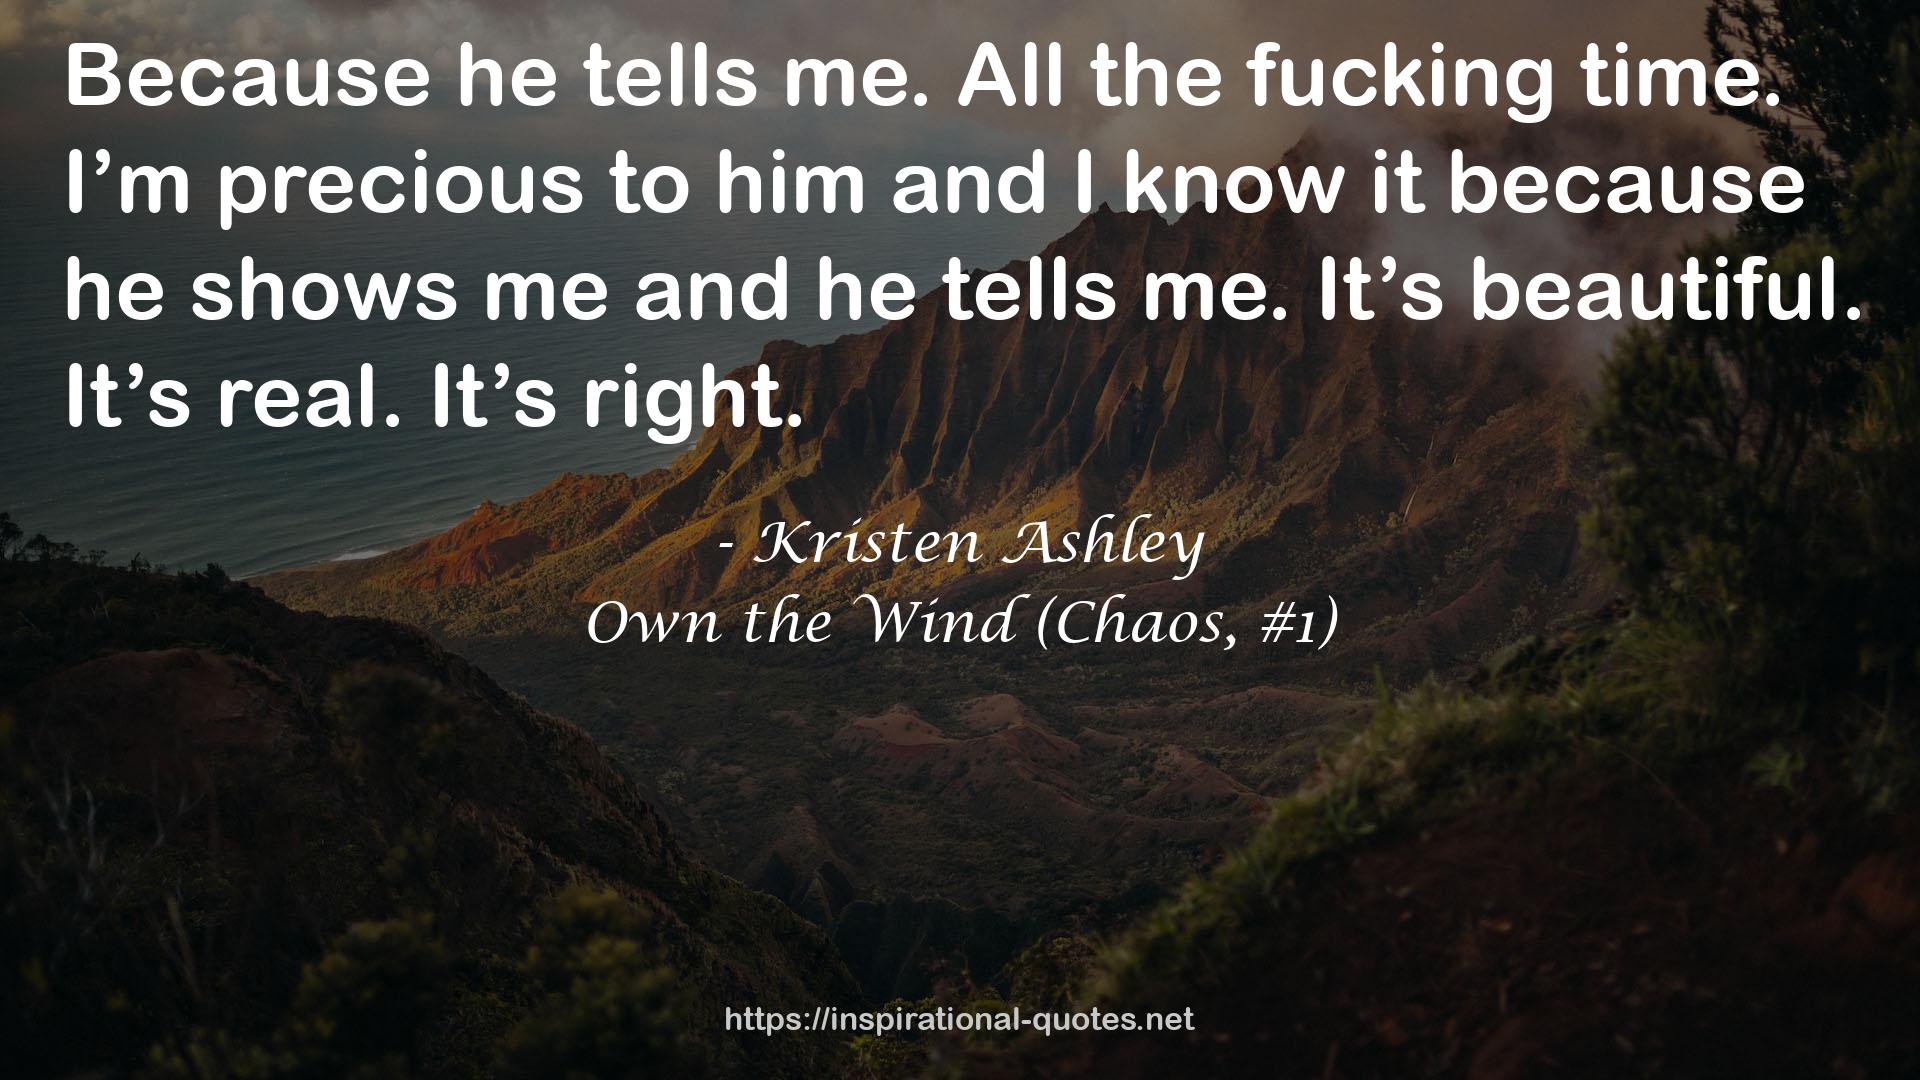 Own the Wind (Chaos, #1) QUOTES